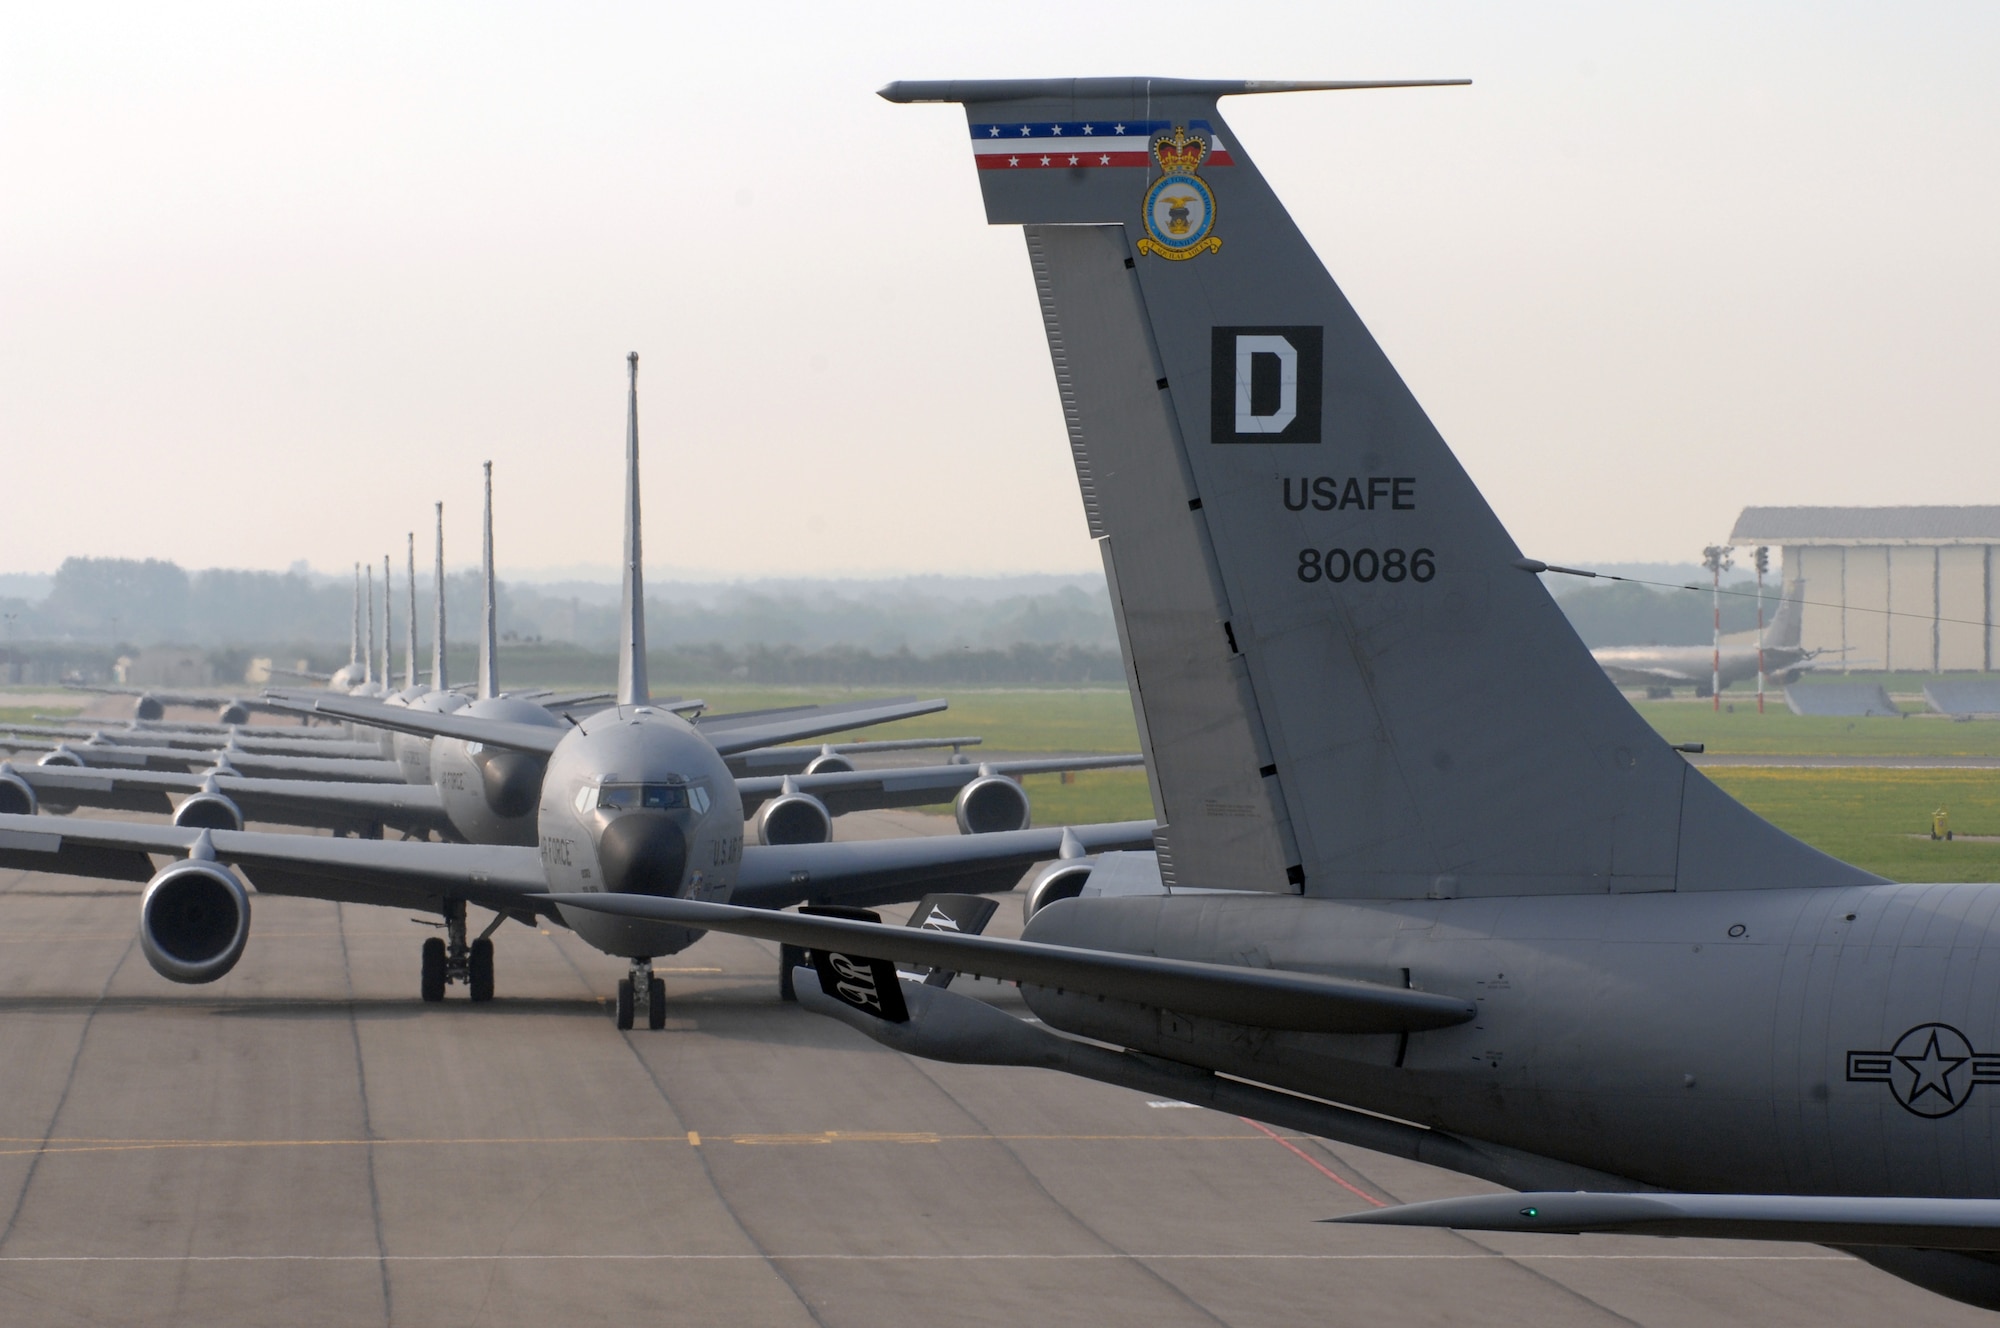 RAF MILDENHALL, England -- The tail of 100th Air Refueling Wing KC-135s bear unique markings making them immediately identifiable from other Stratotankers.  The Box D and base shield are each 48 inches tall, and are created by Airmen at the corrosion control shop.  (U.S. Air Force photo by Senior Airman Teresa Hawkins)